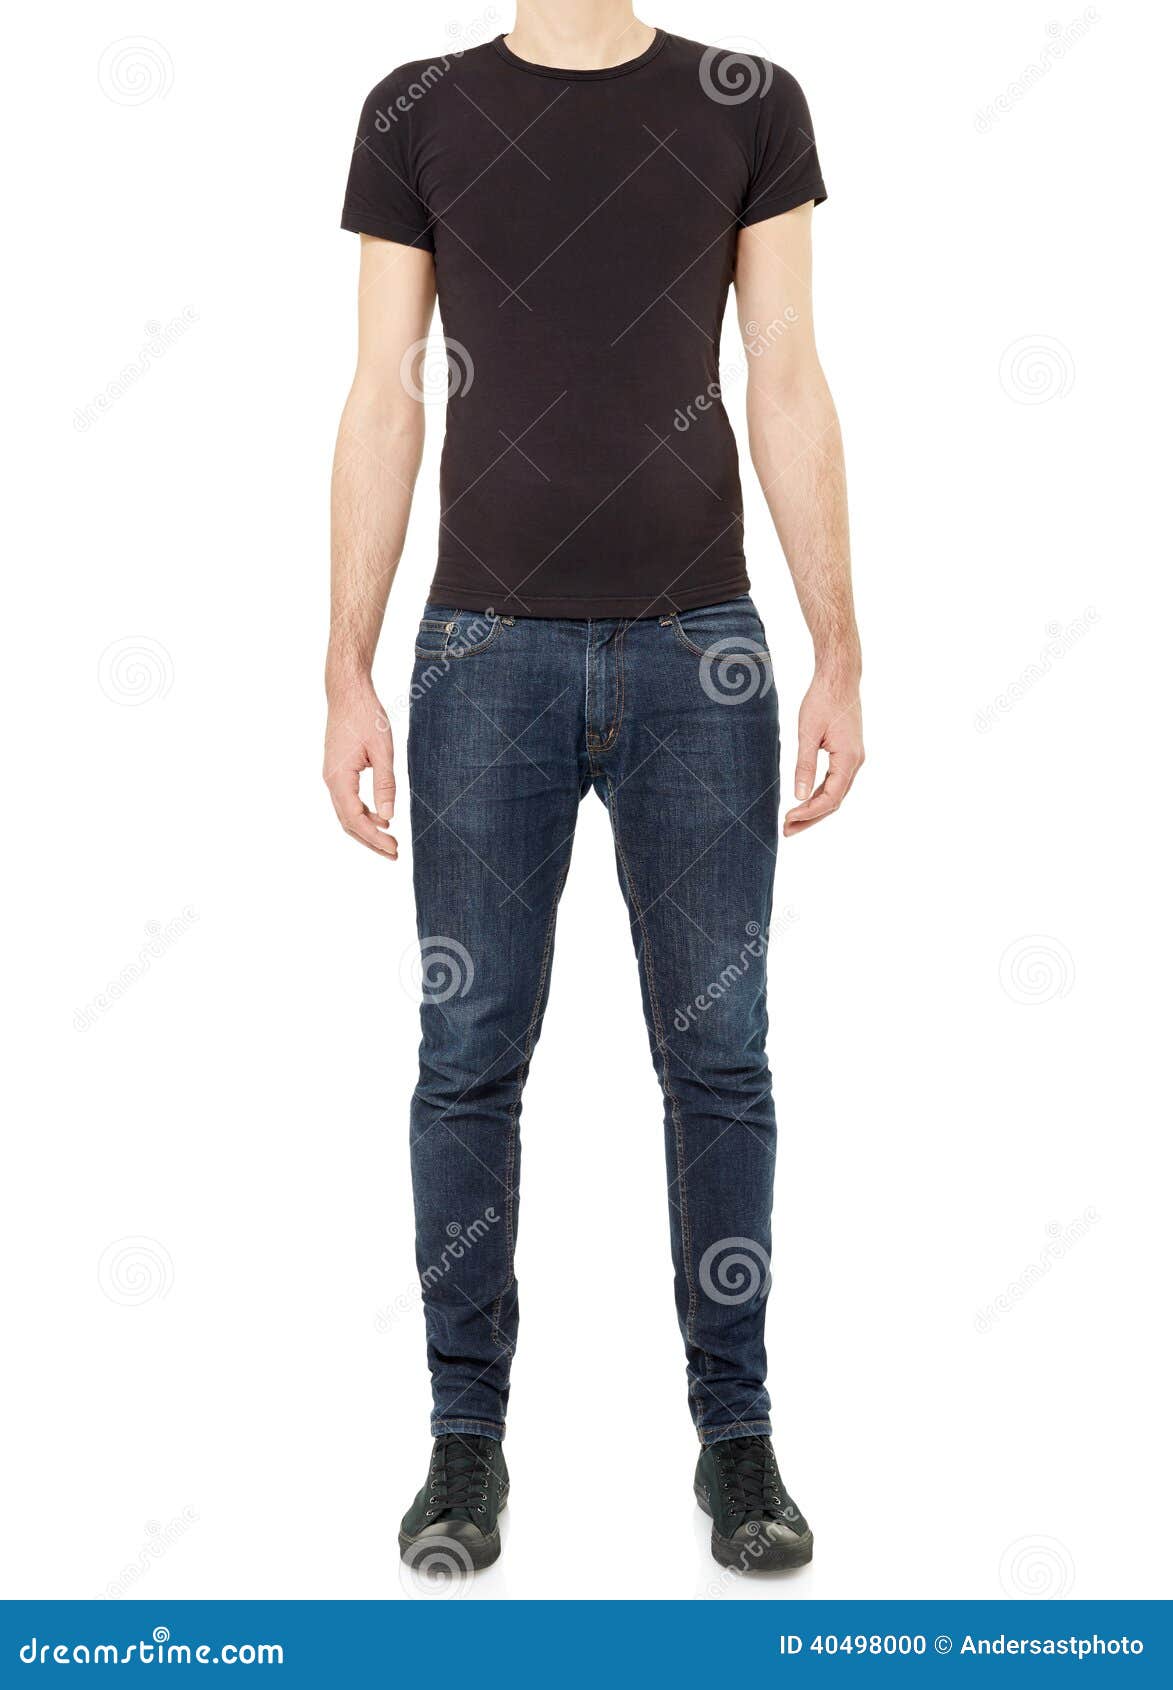 Black T-shirt On Man In Jeans Stock Photo - Image of male, jeans: 40498000